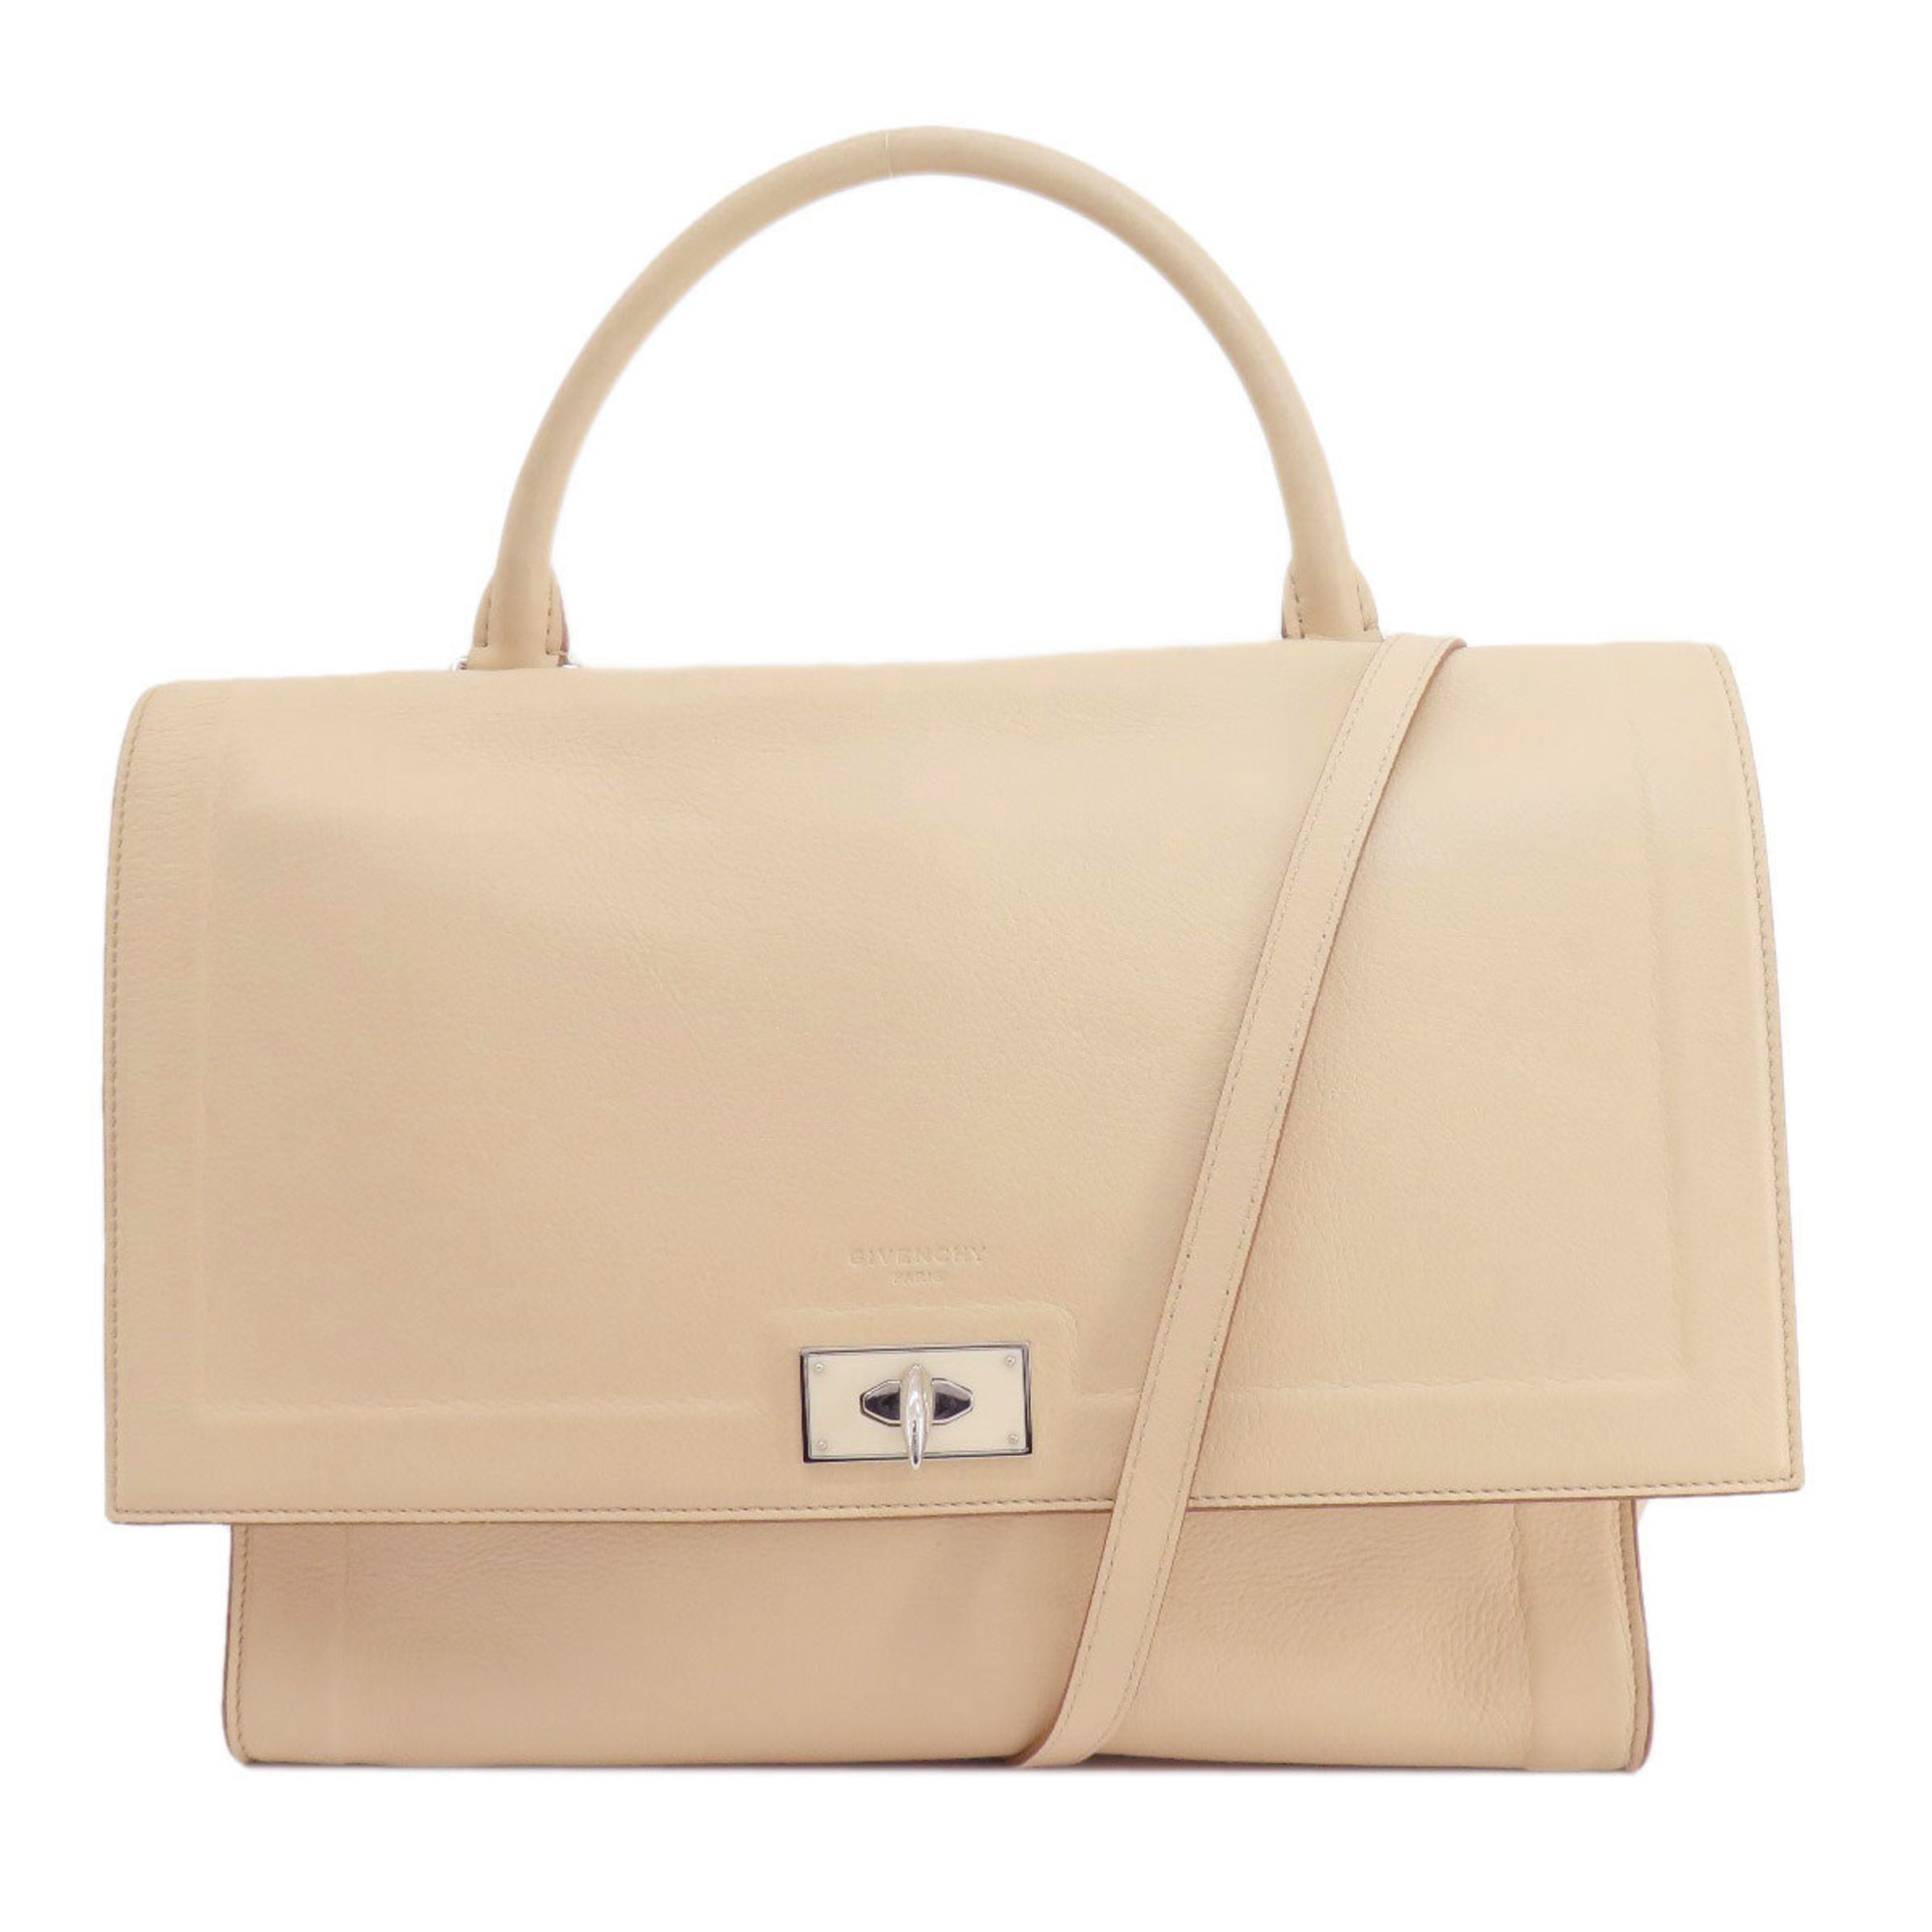 Givenchy tote bag leather women's GIVENCHY